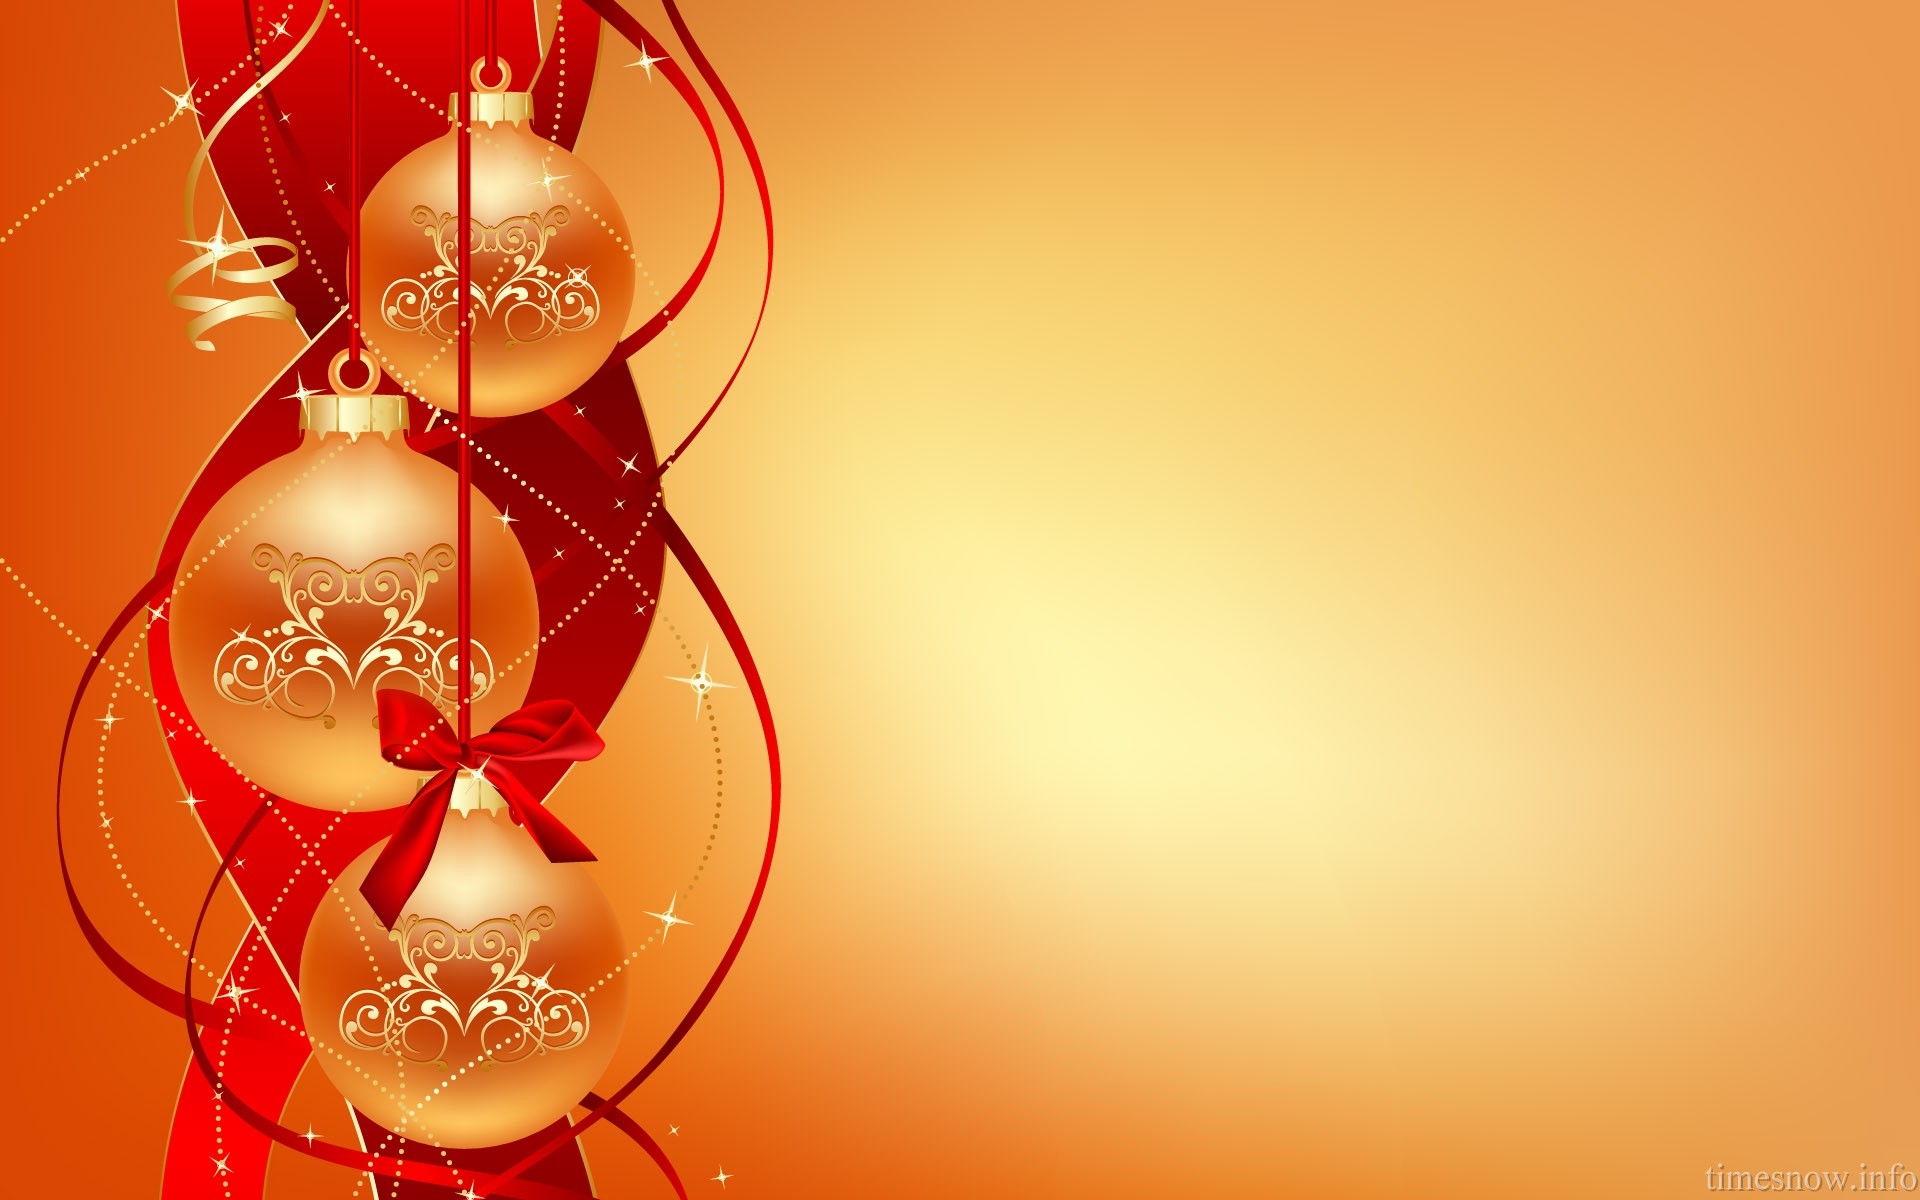 1920x1200 Red And Gold Christmas Backgrounds – Happy Holidays!